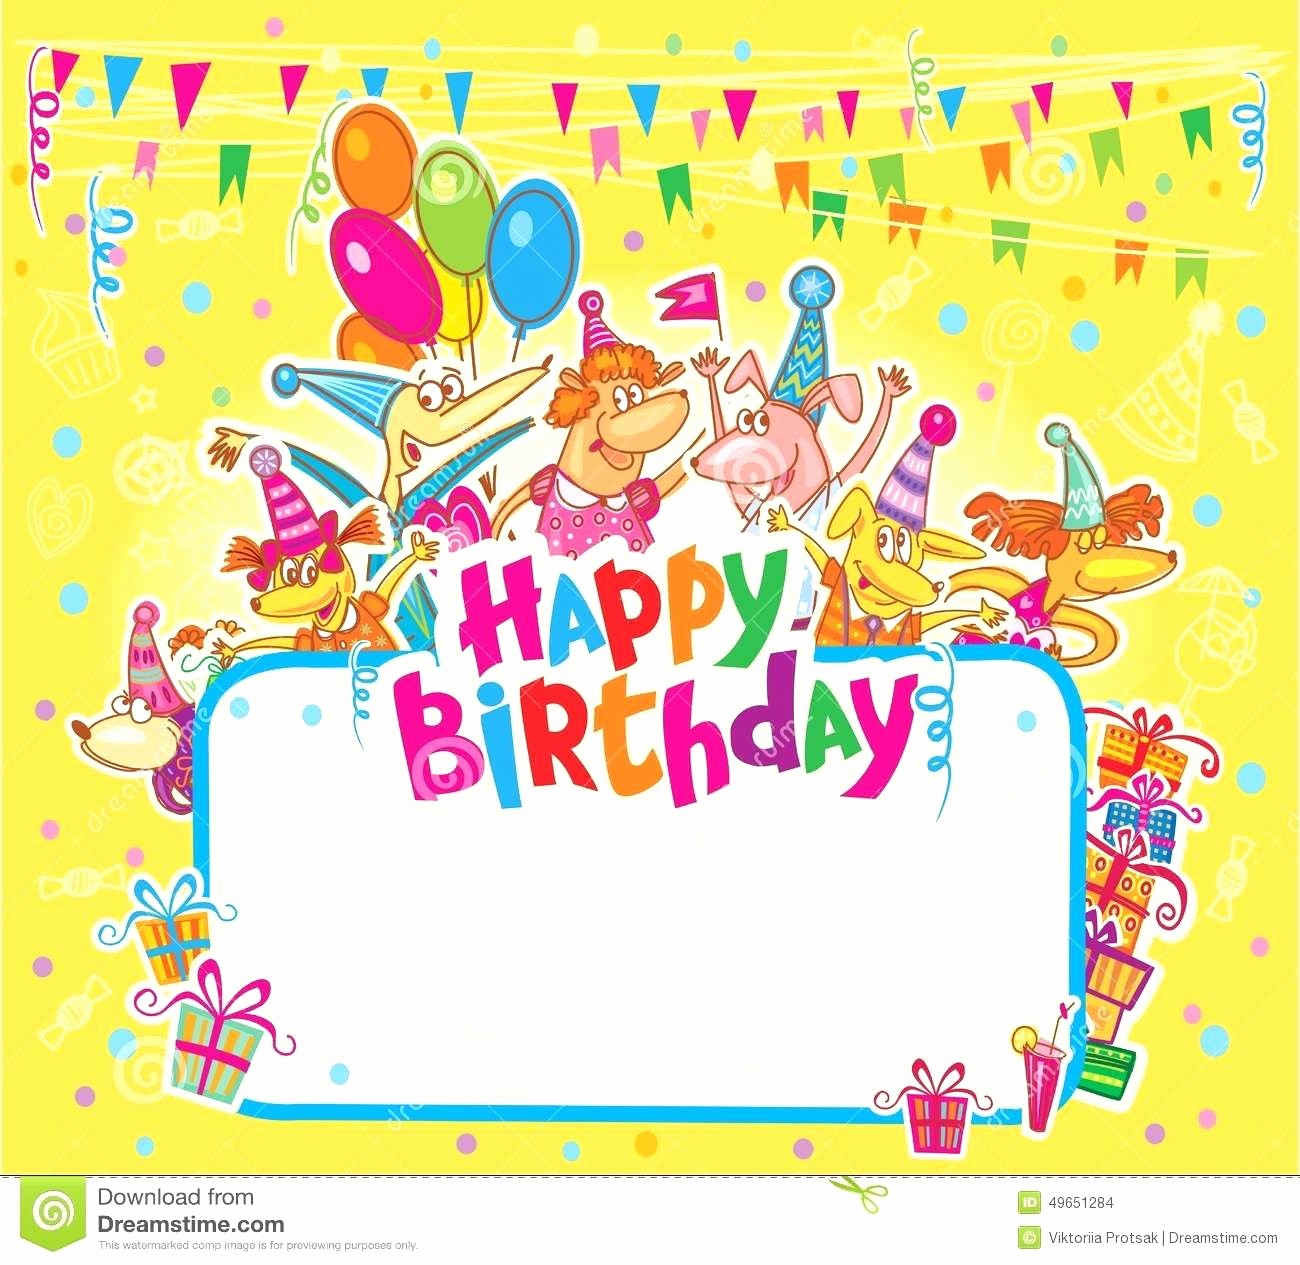 Microsoft Word Greeting Card Template Awesome Template Happy Birthday Card Template Word